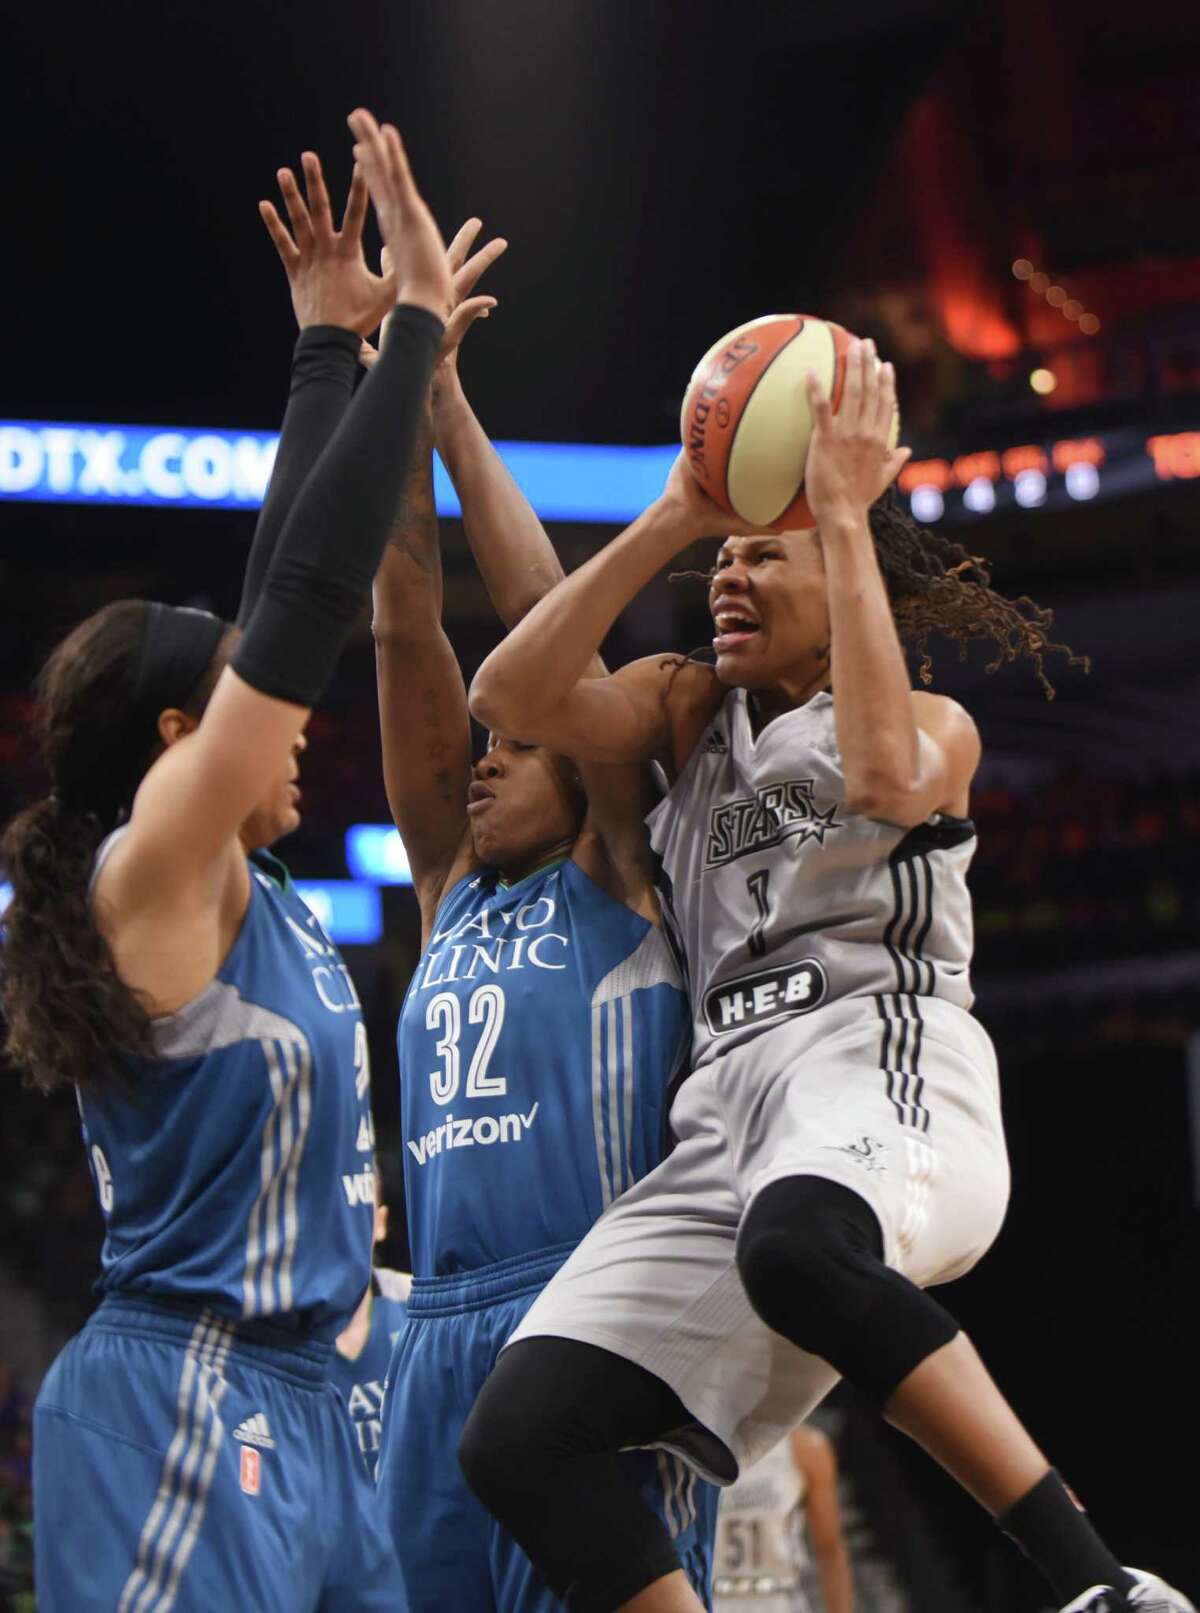 The Stars’ Monique Currie (1) of the San Antonio Stars drives to shoot as Minnesota's Maya Moore, left, and Rebekkah Brunson defend during WNBA action in the AT&T Center on Tuesday, July 12, 2016.